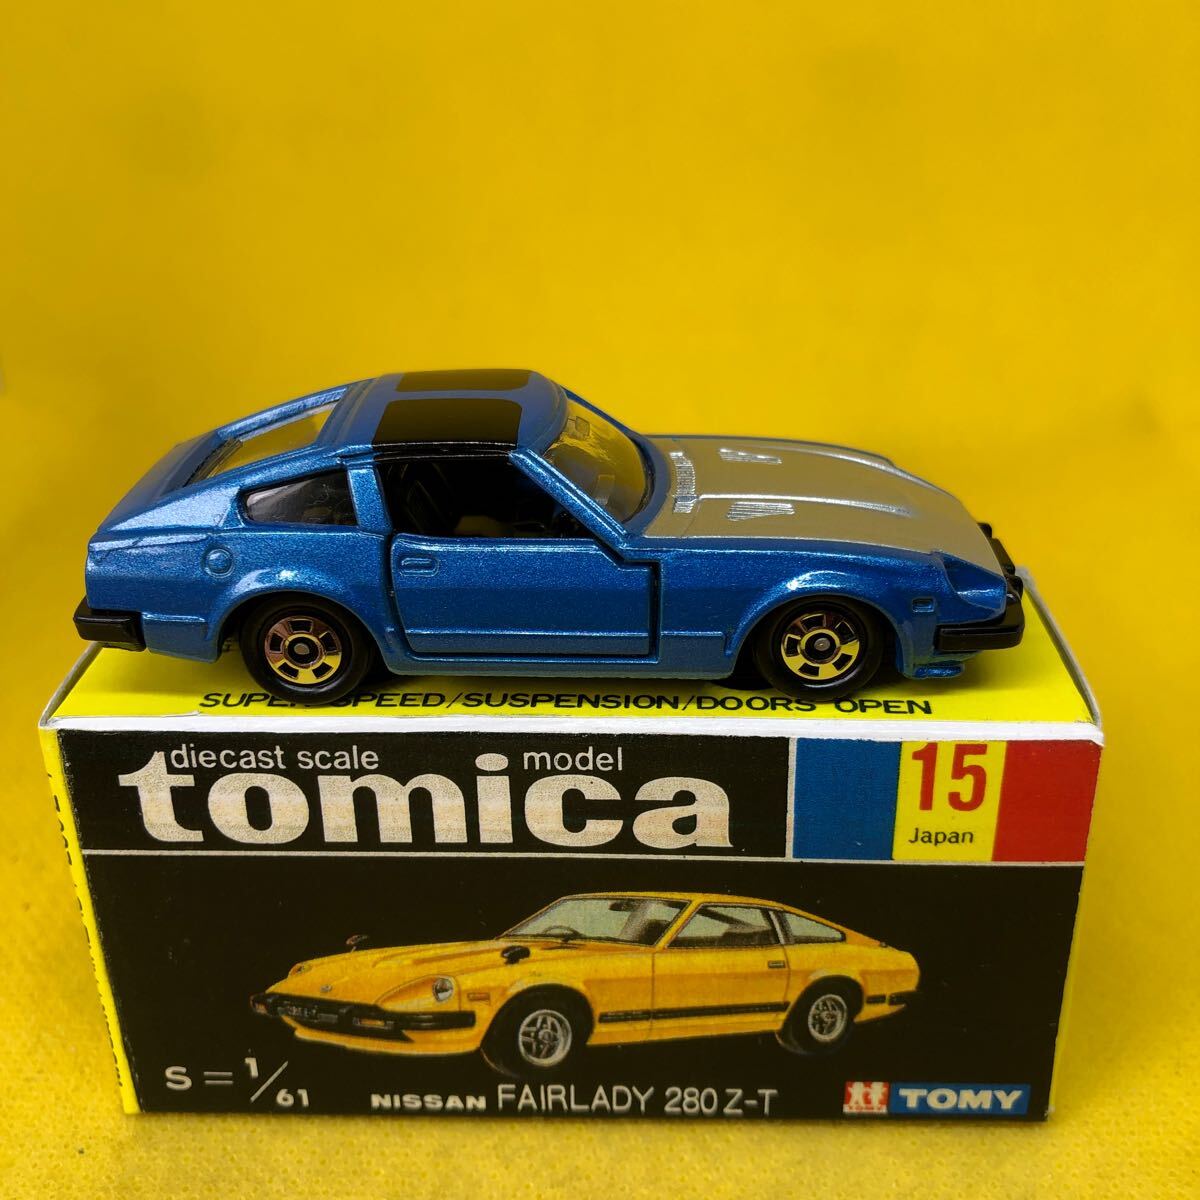  Tomica made in Japan black box 15 Nissan Fairlady 280Z-T that time thing out of print ②